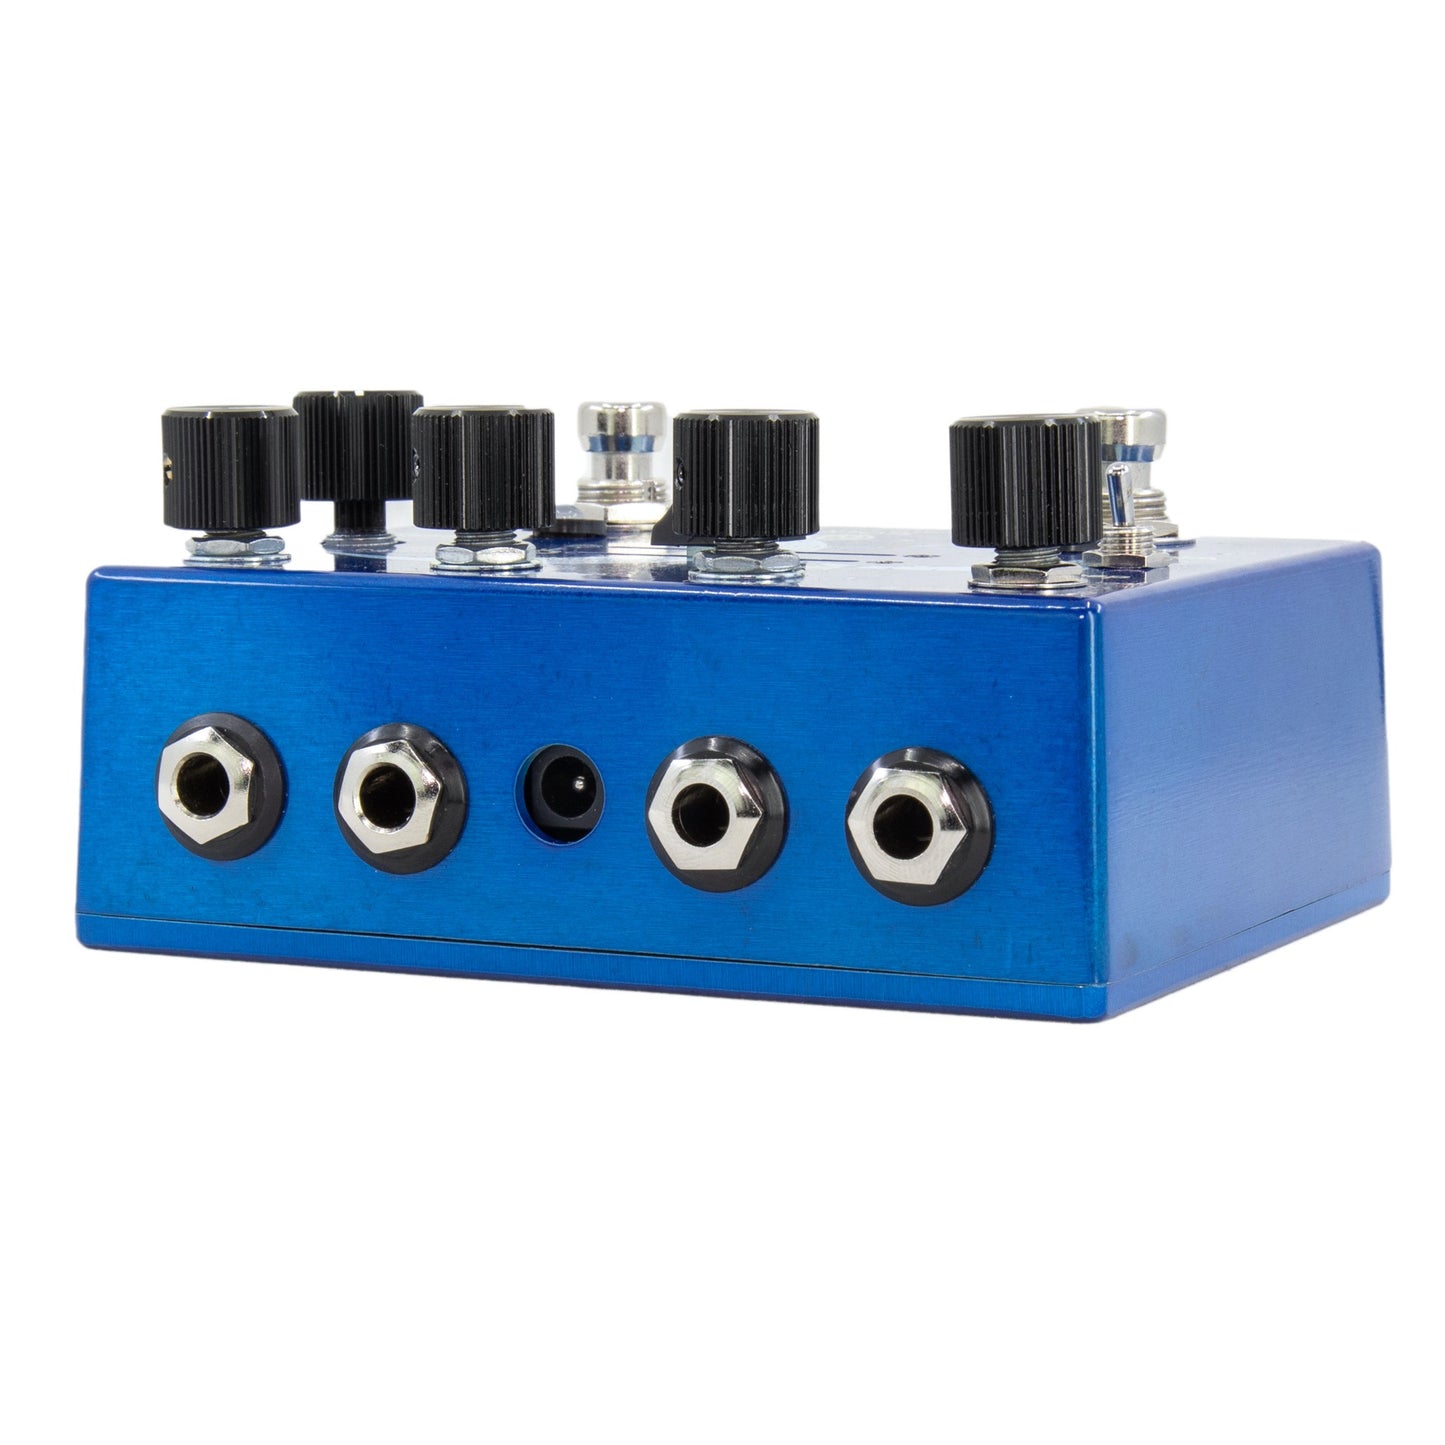 Walrus Audio Slöer Stereo Ambient Reverb Pedal, Blue